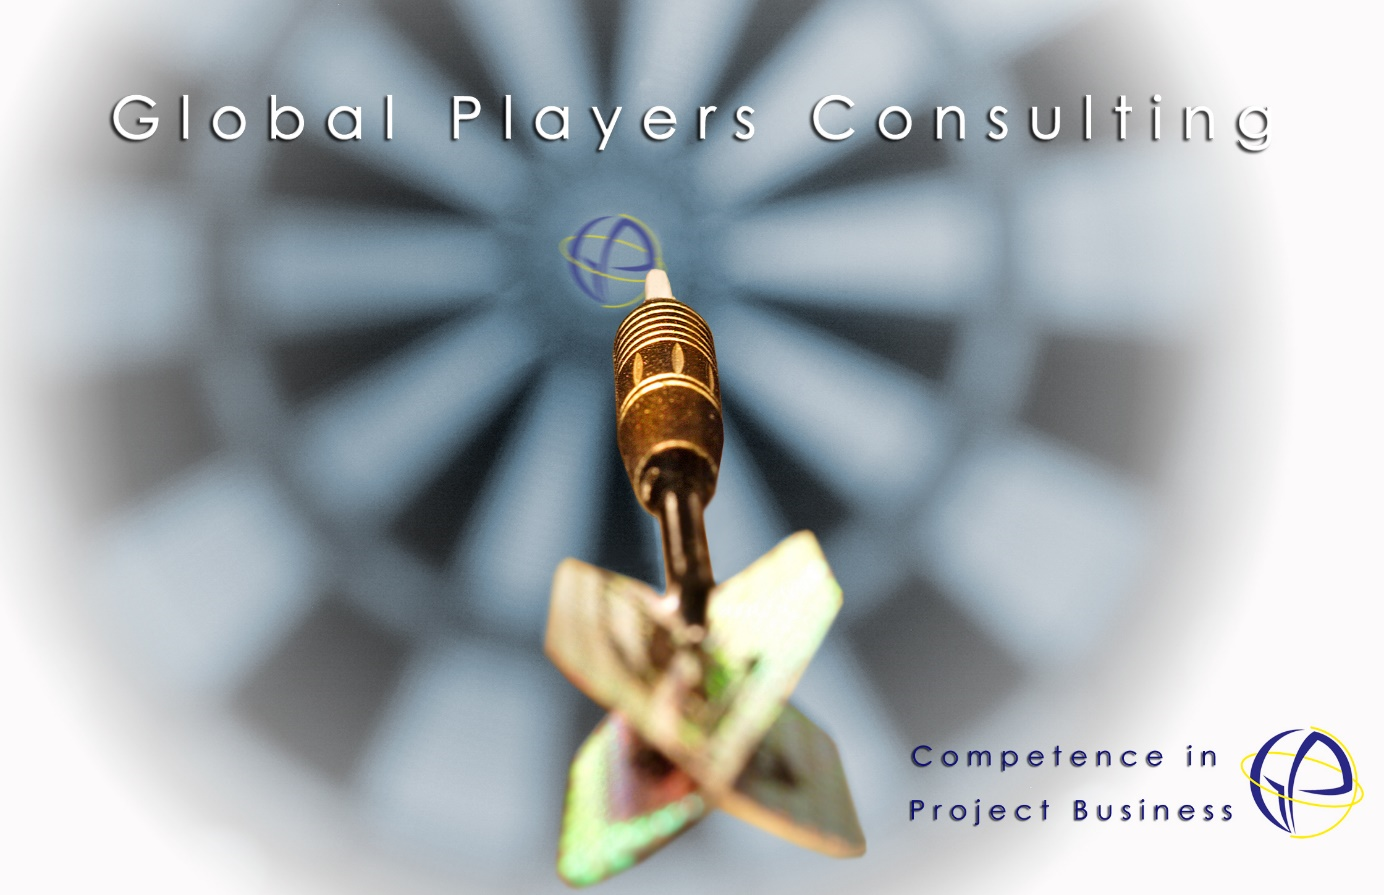 Global Players Consulting - Competence in Project Business